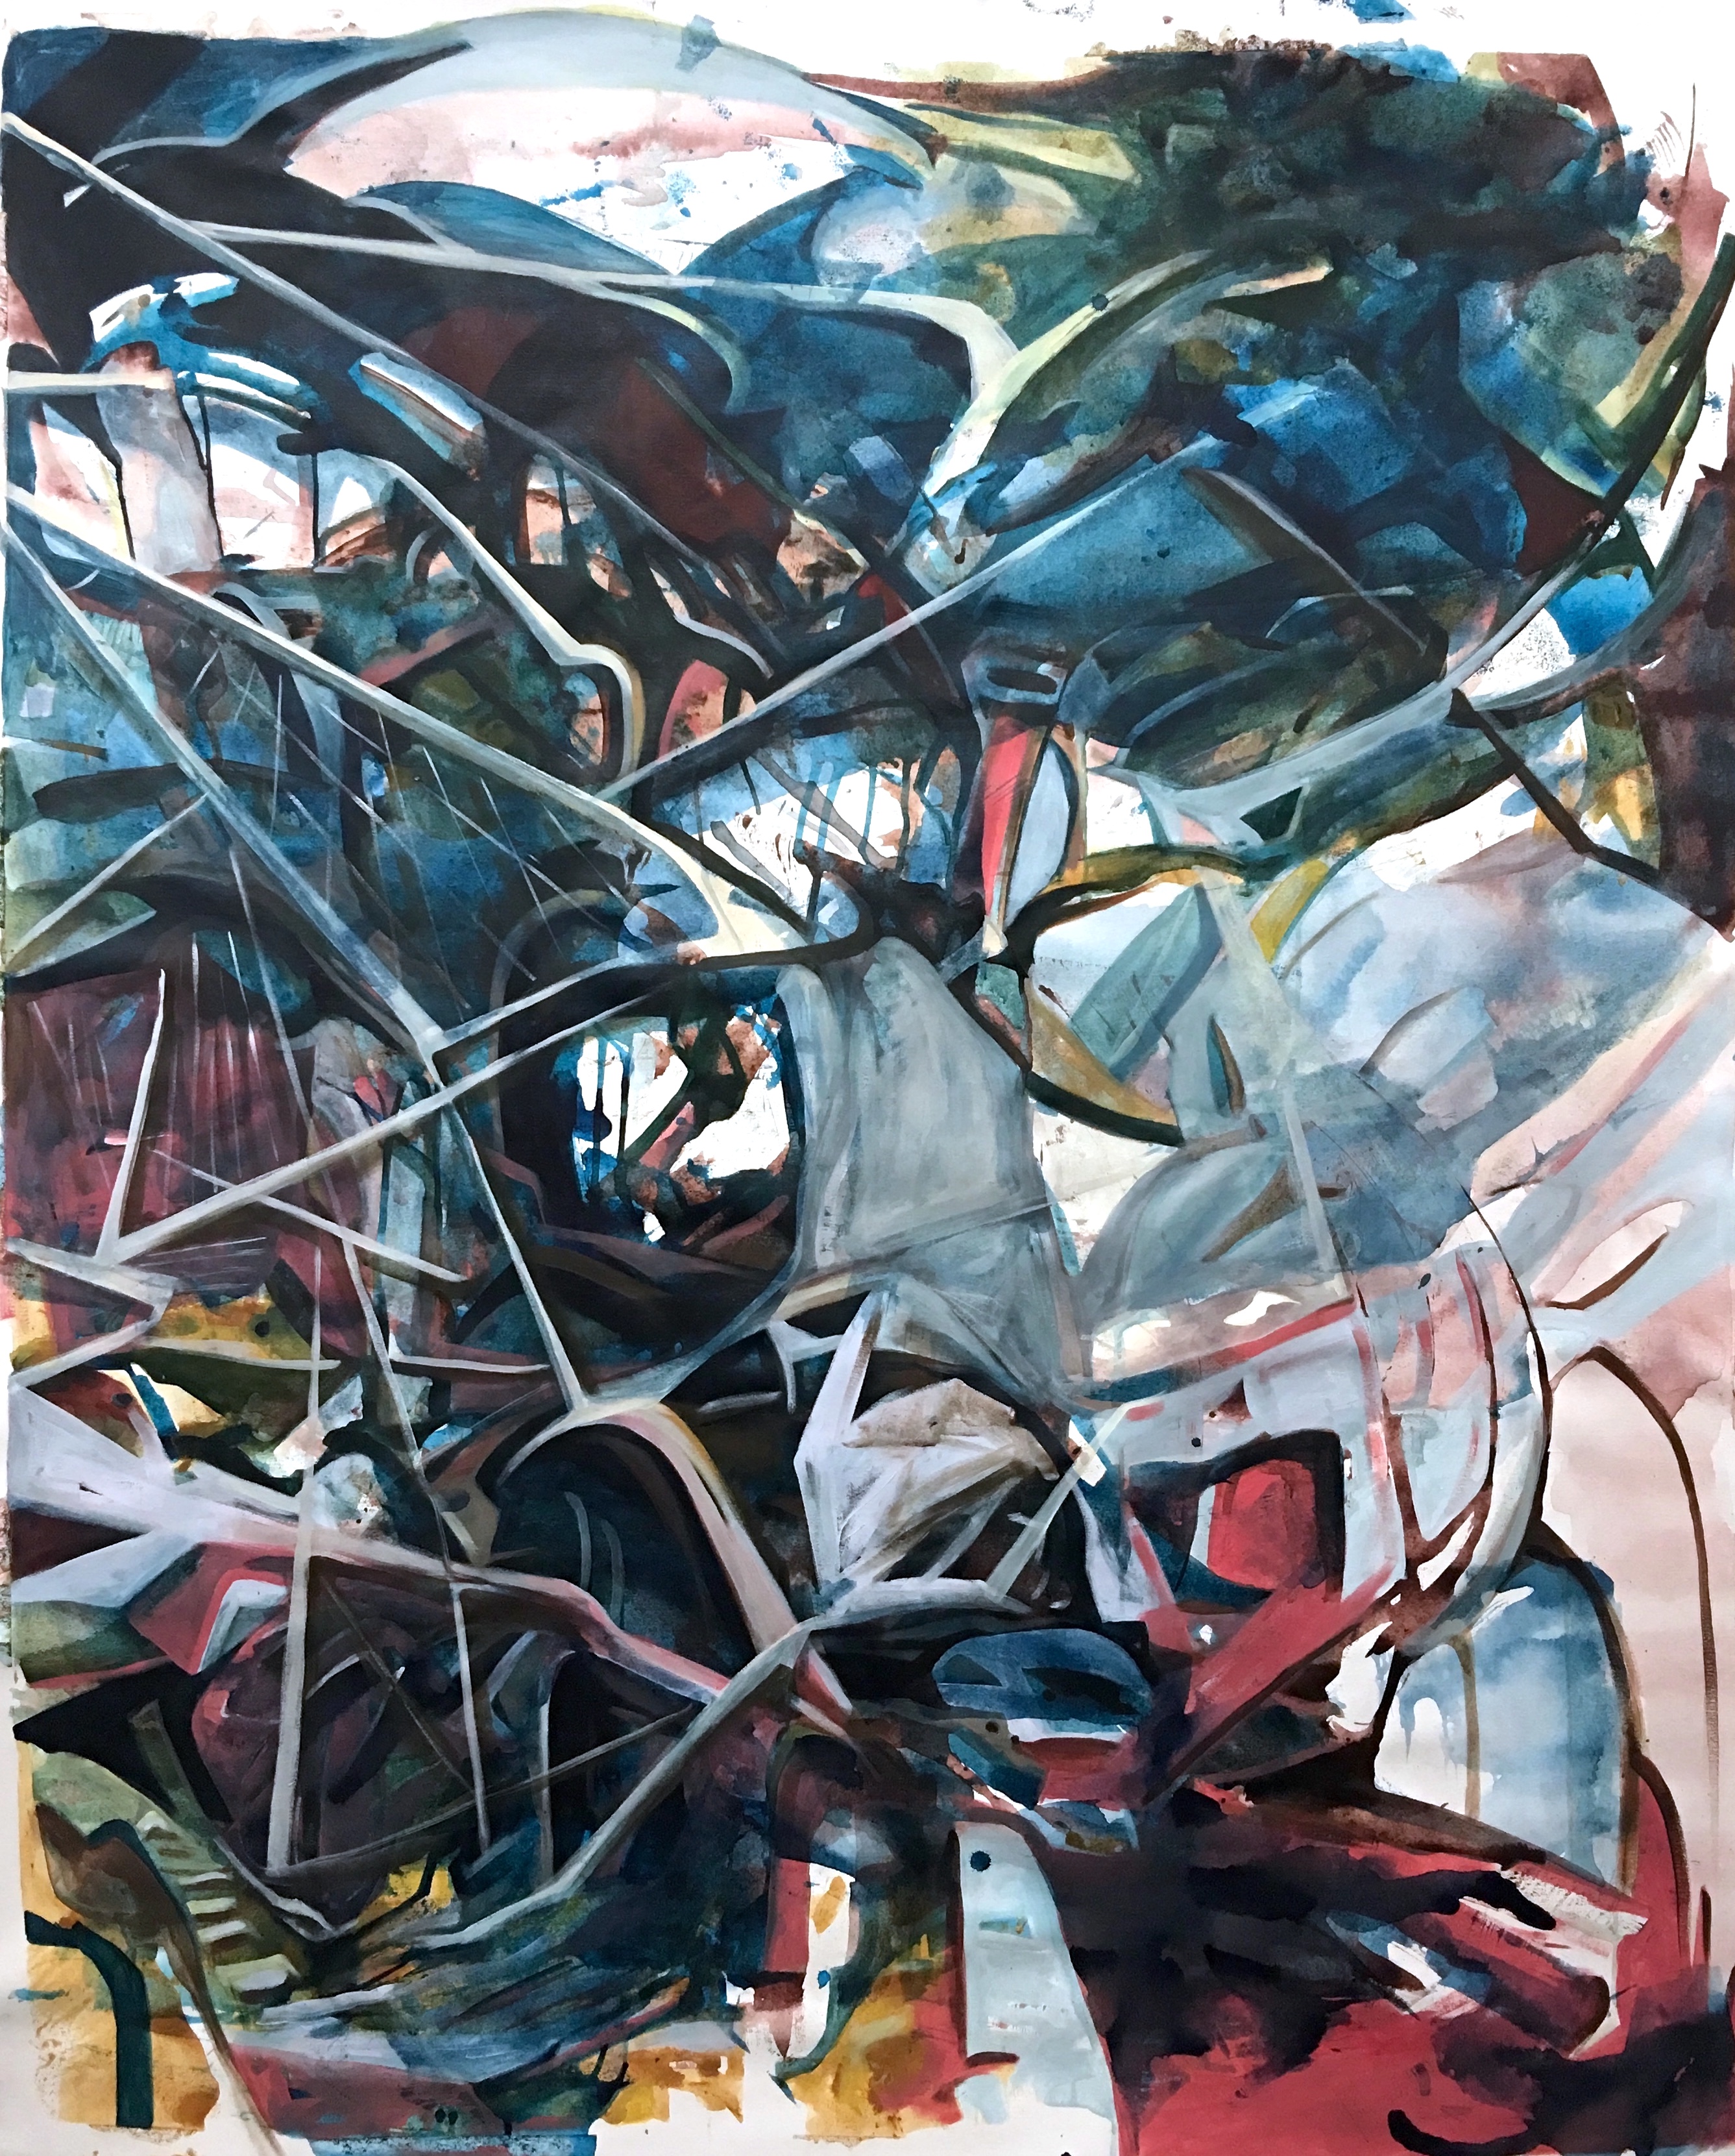 View of the Garden, acrylic on canvas, 68x56 inches, 2018